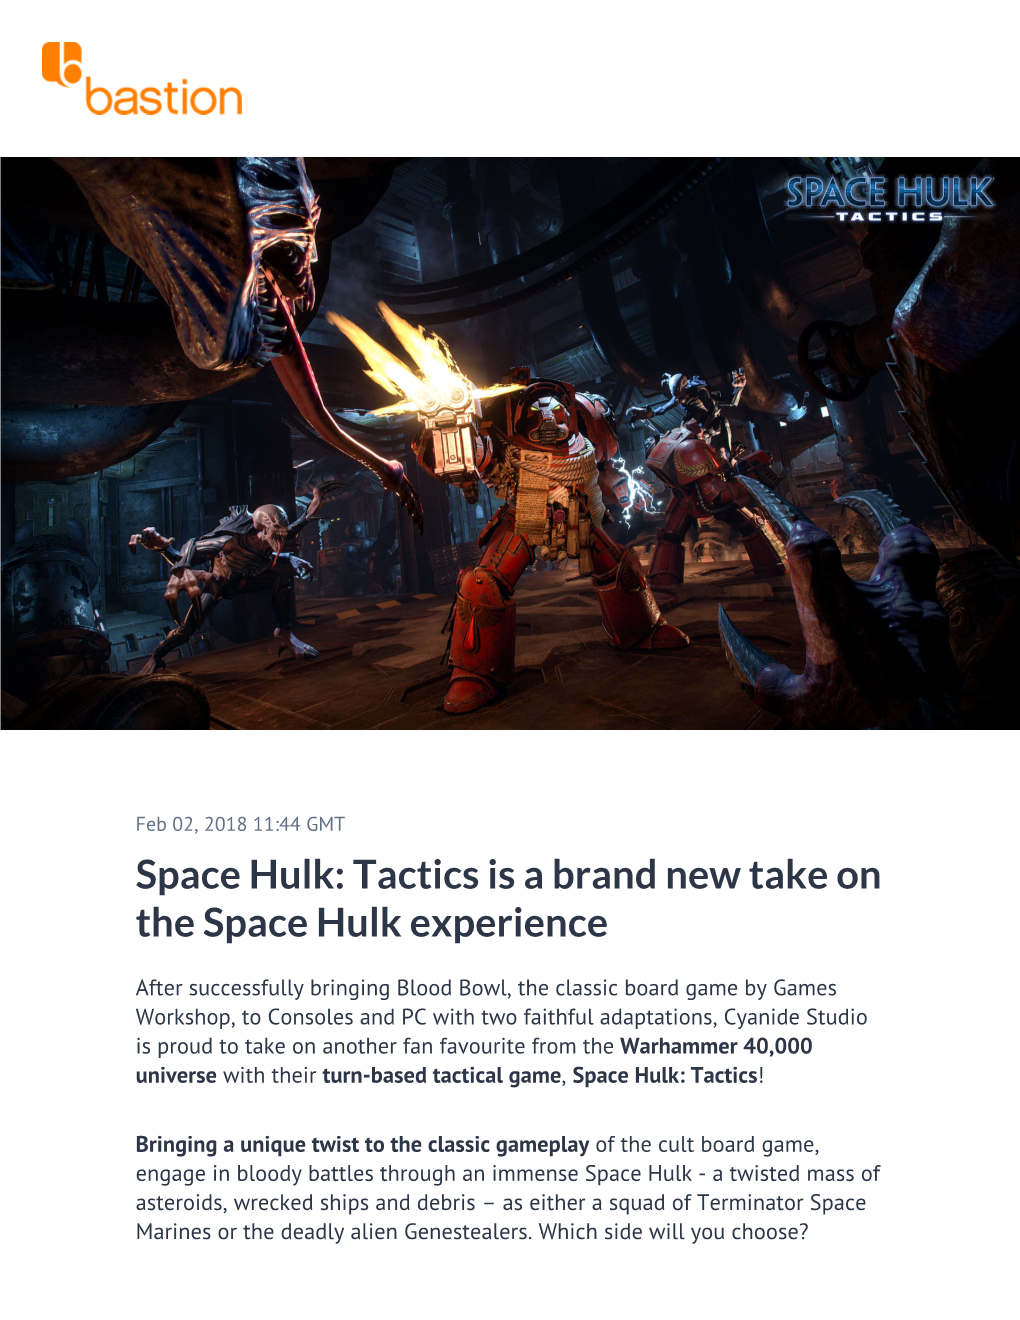 Space Hulk: Tactics Is a Brand New Take on the Space Hulk Experience